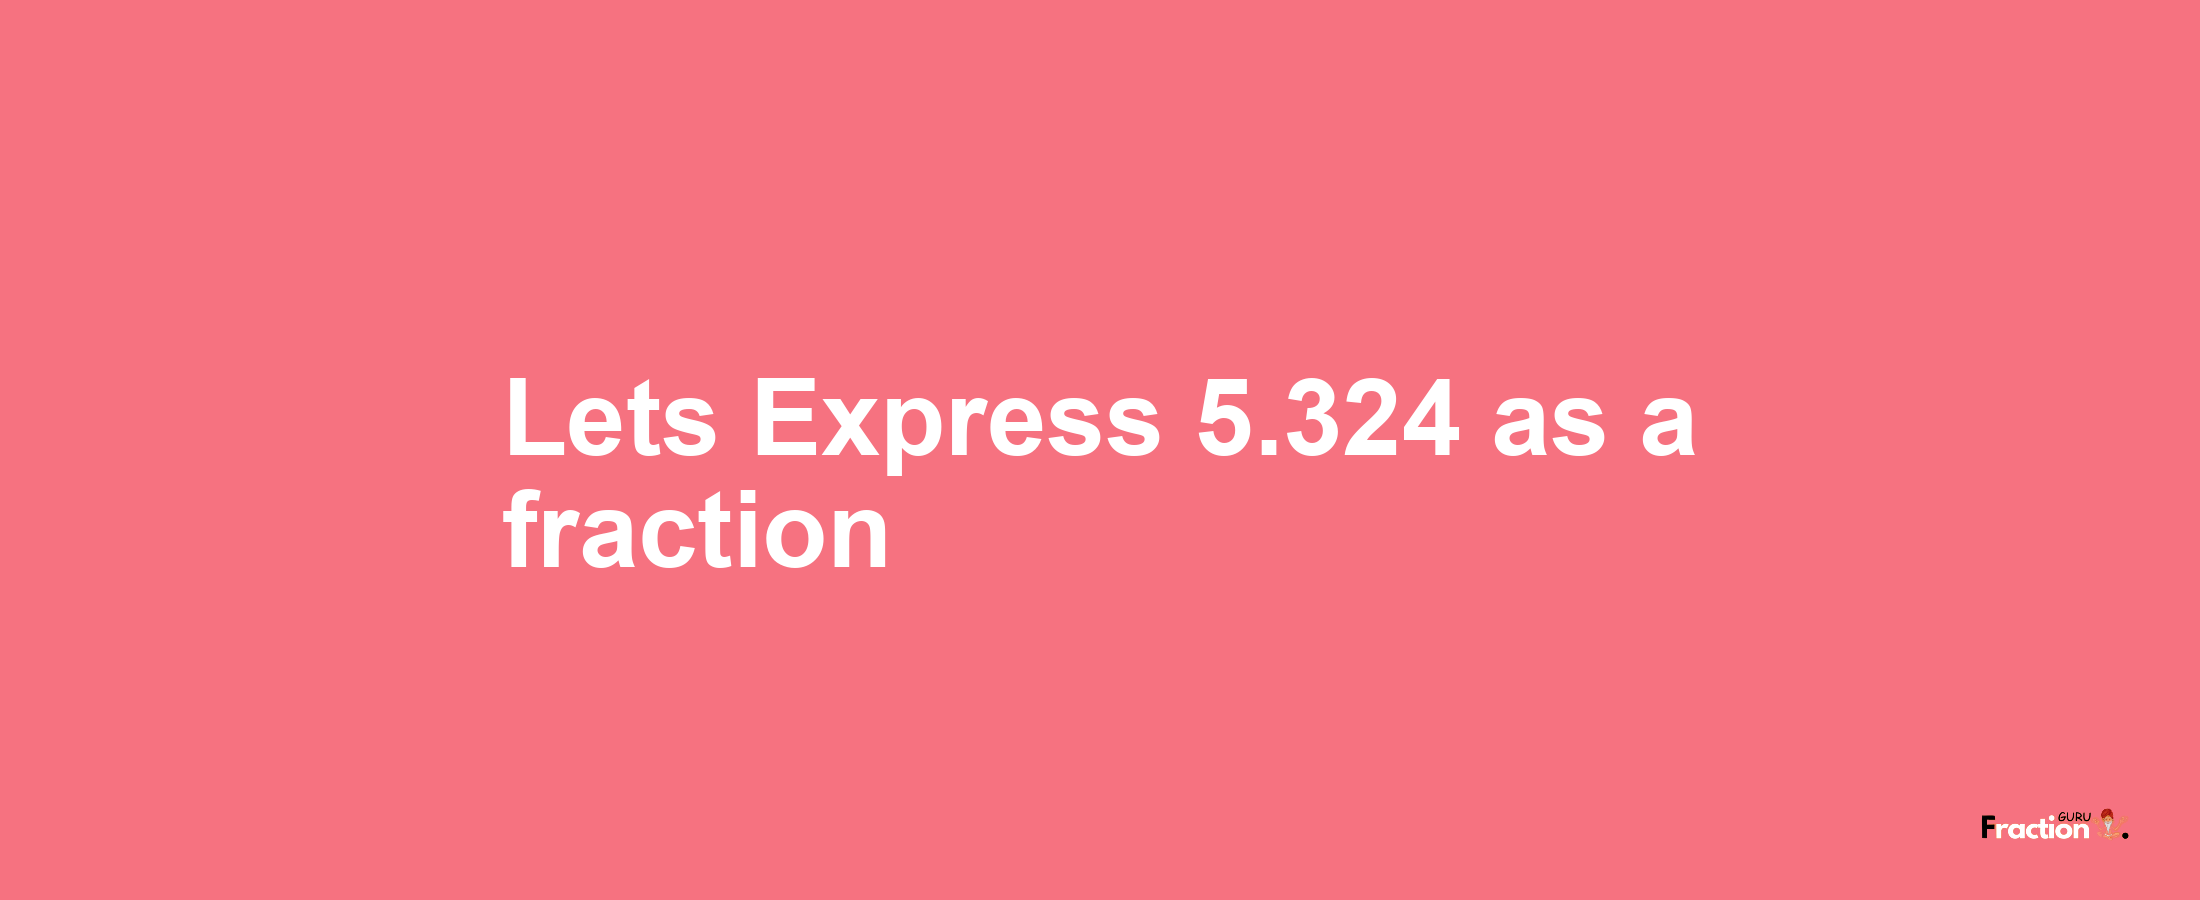 Lets Express 5.324 as afraction